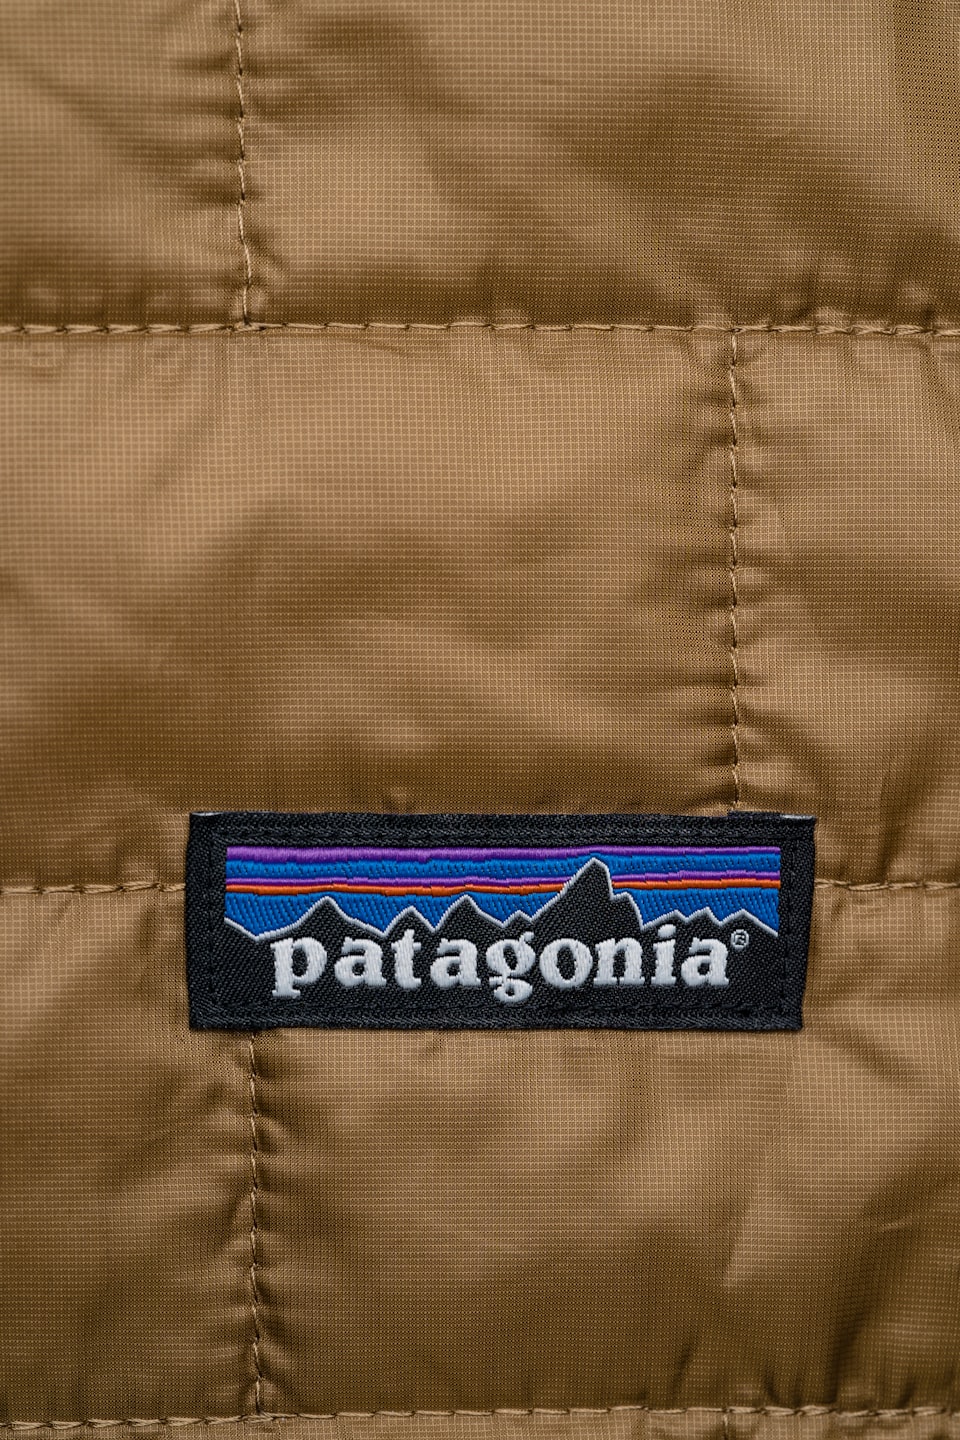 Patagonia "Goes Purpose" and Donates 100% of Profits to Climate Change!